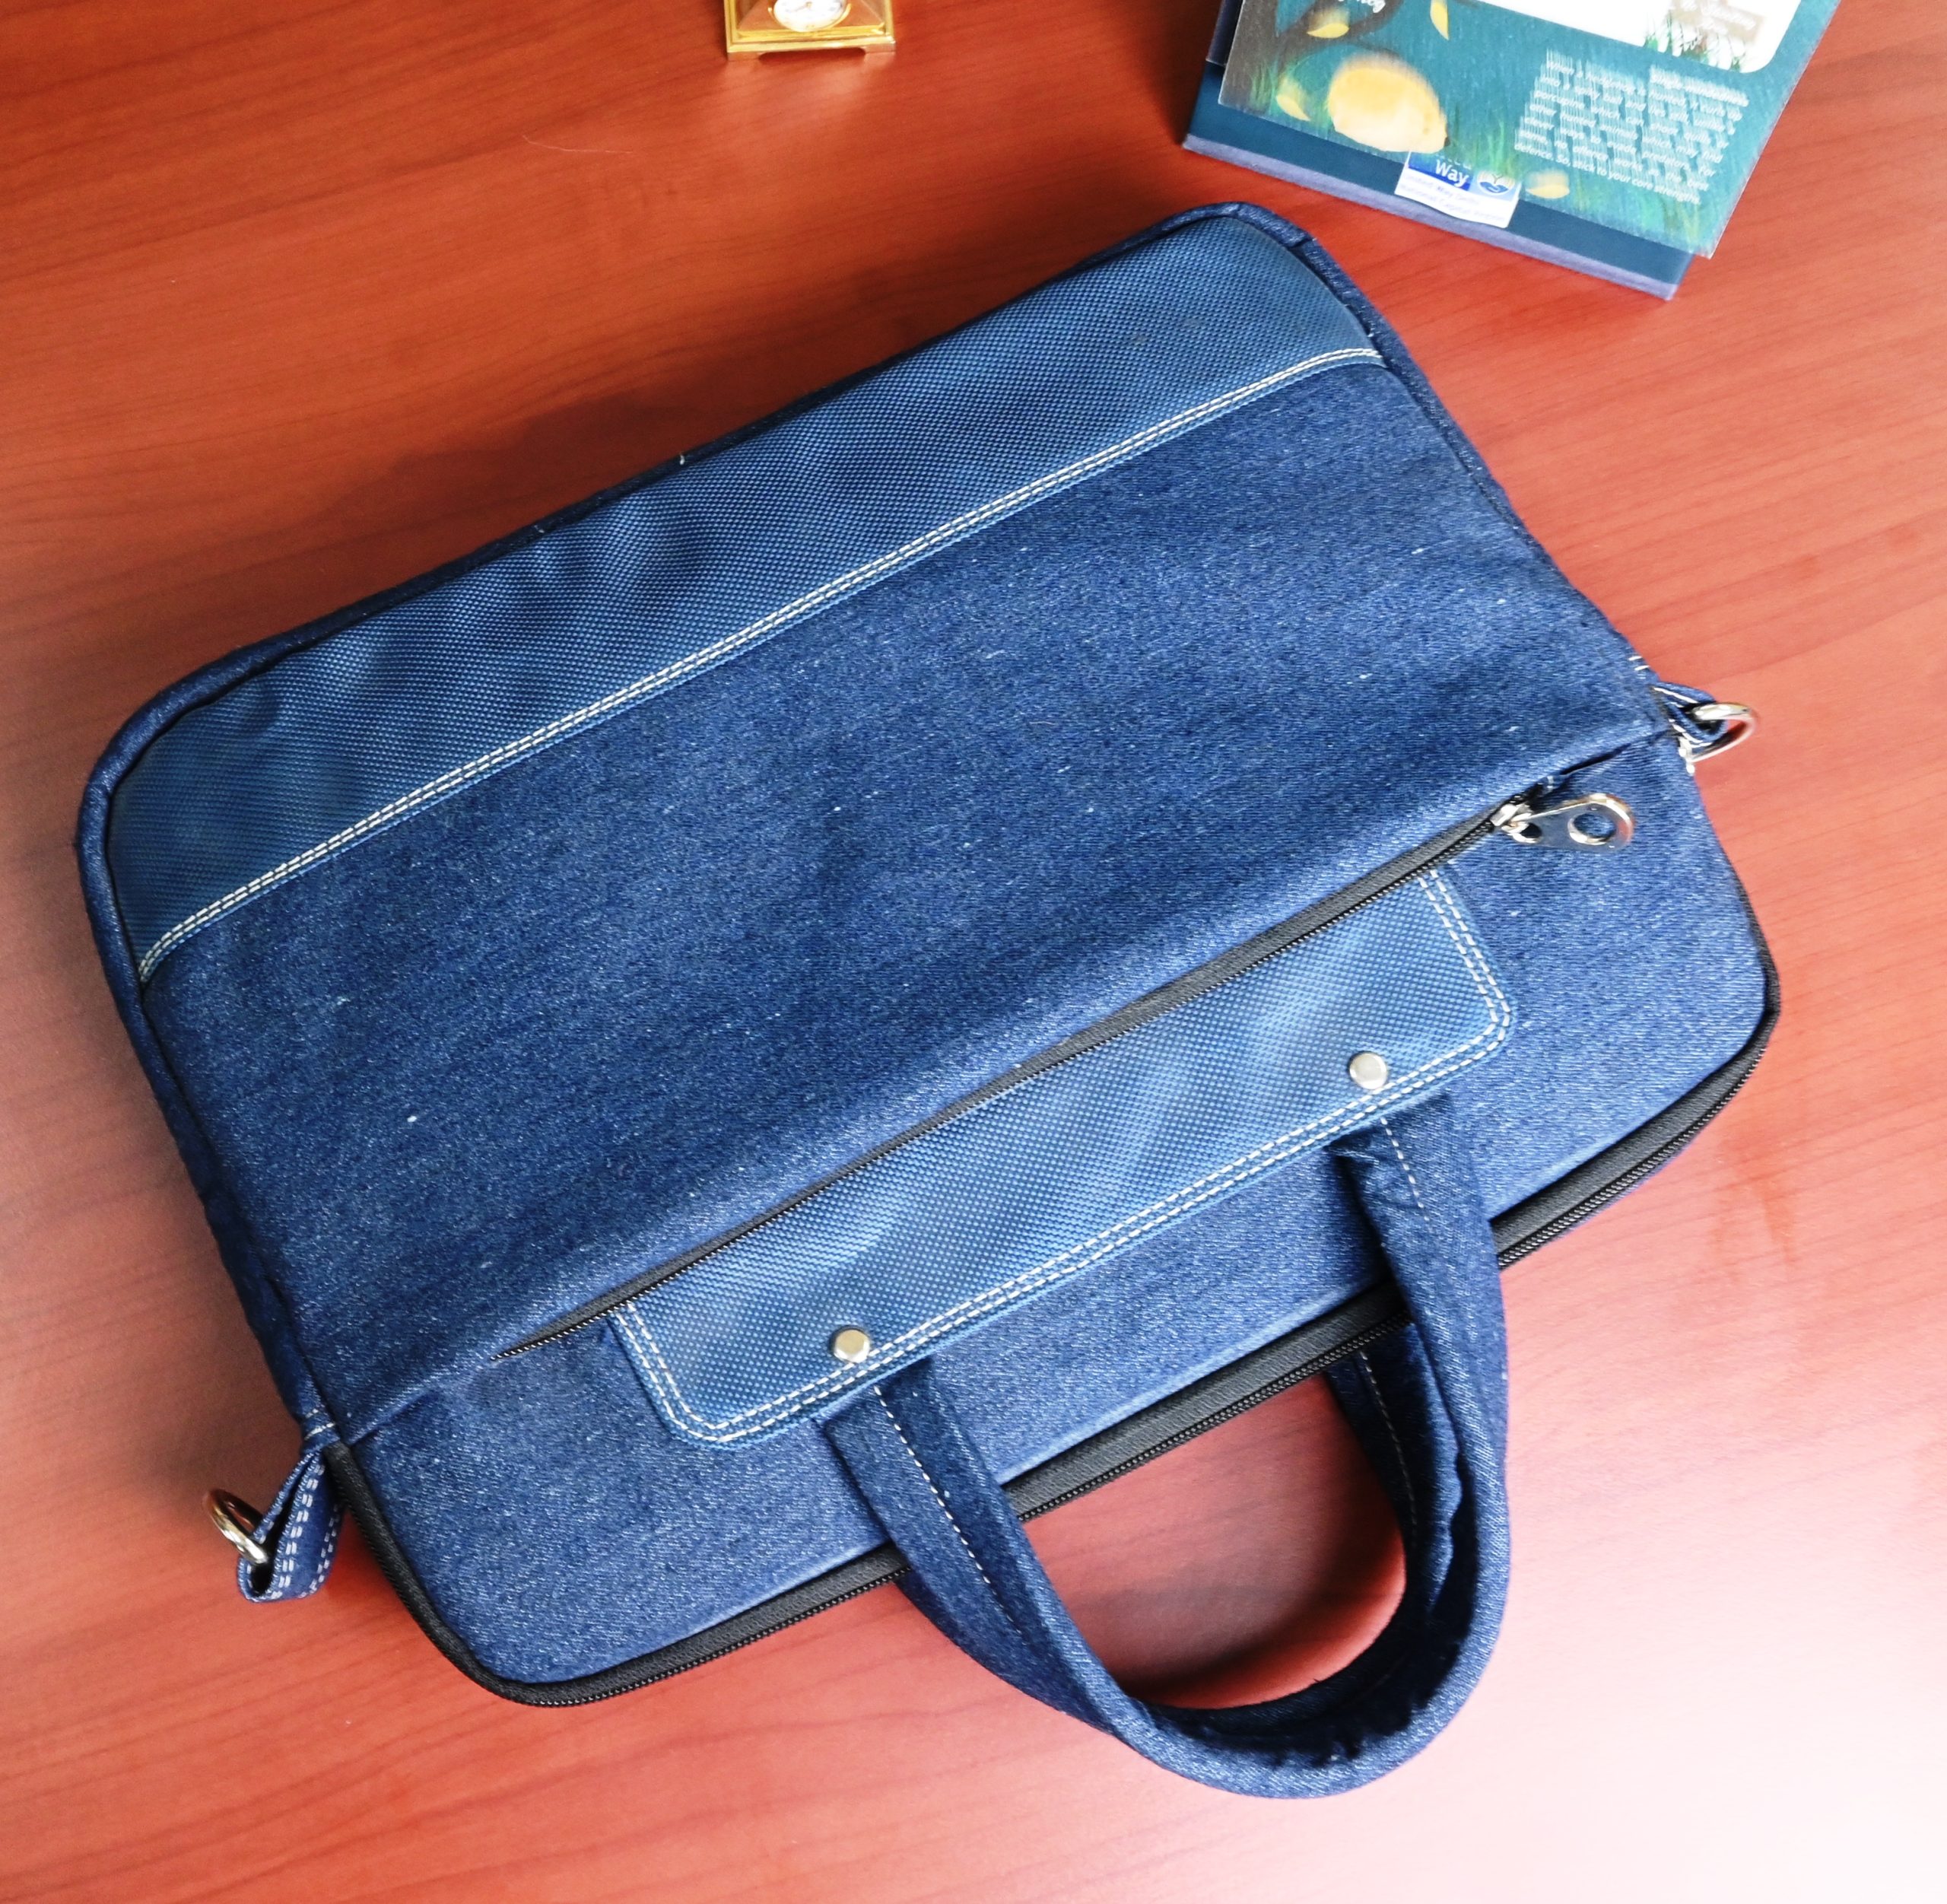 13 Eco Friendly Bags & Purses That Are Chic, Stylish, and Planet Friendly -  Going Zero Waste